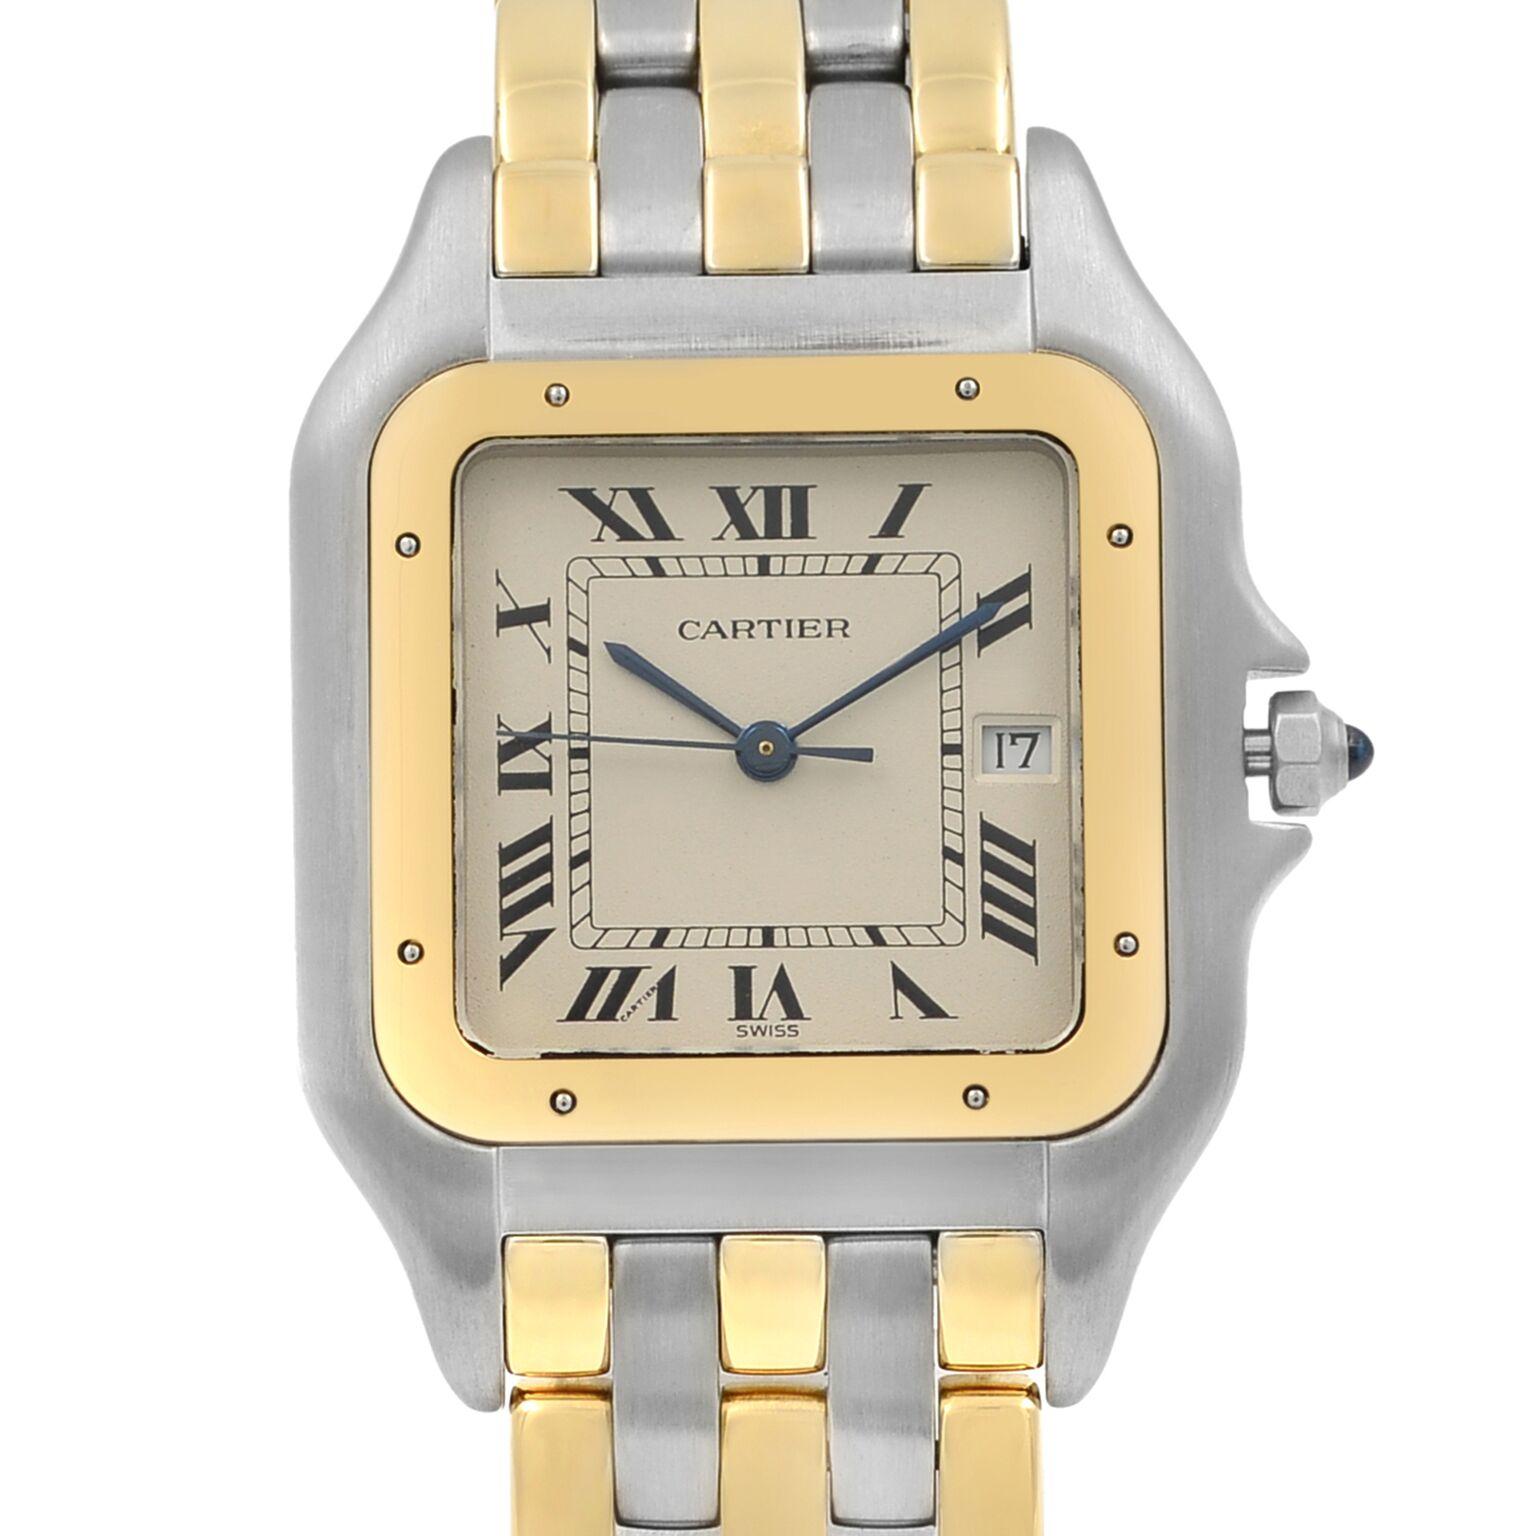 This pre-owned Cartier Panthere Jumbo 3Rows Gold Quartz Men's Watch 187957It has a square shape face, date dial, and has hand roman numerals style markers. It is completed with a stainless and solid gold band that opens and closes with a double